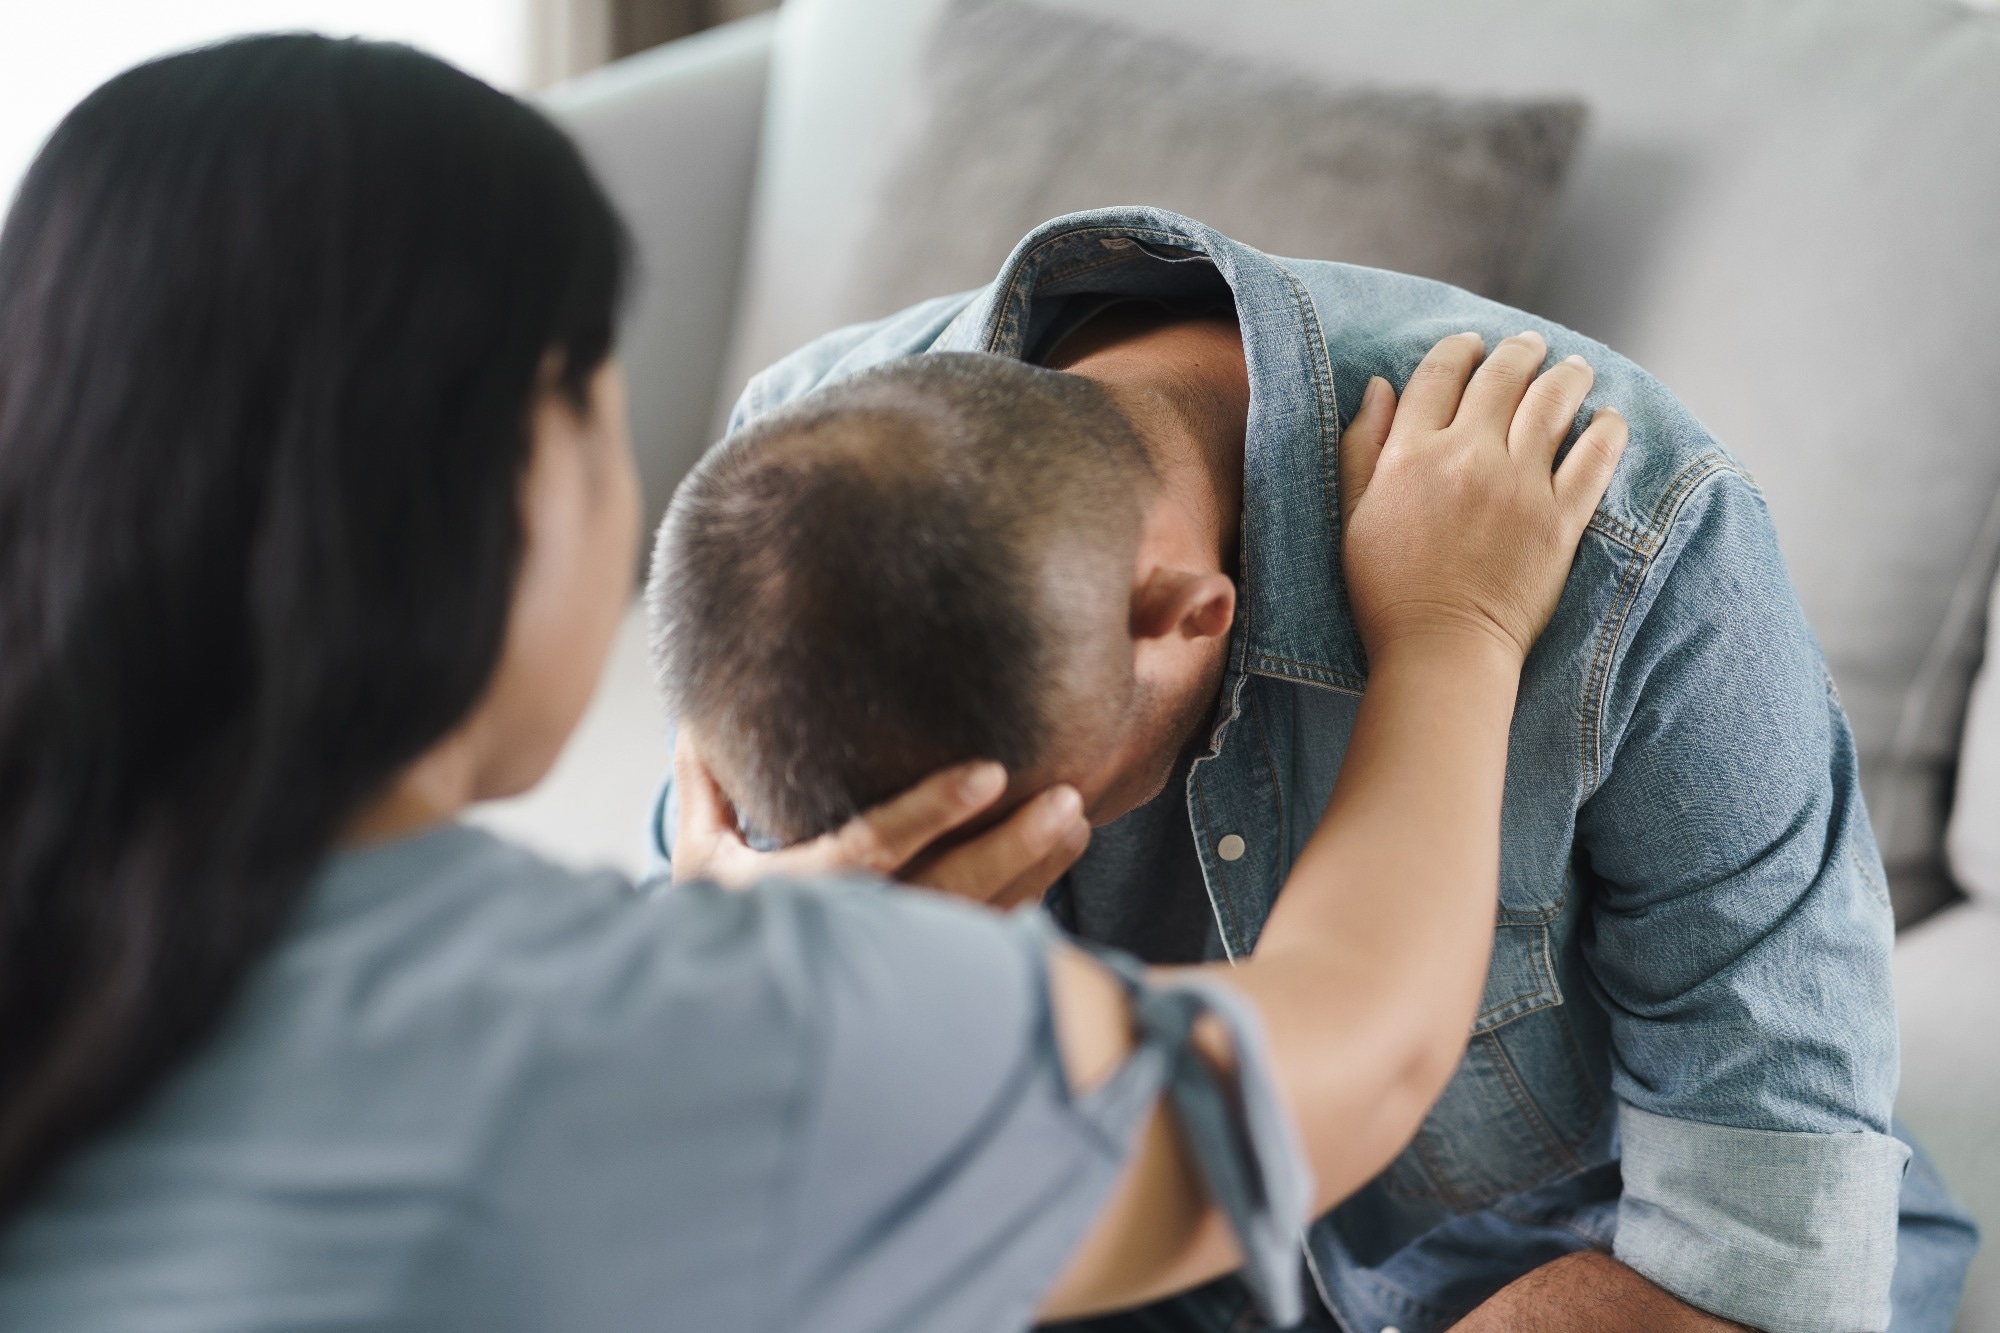 Study: Systematic review of machine learning in PTSD studies for automated diagnosis evaluation. Image Credit: Suriyawut Suriya/Shutterstock.com